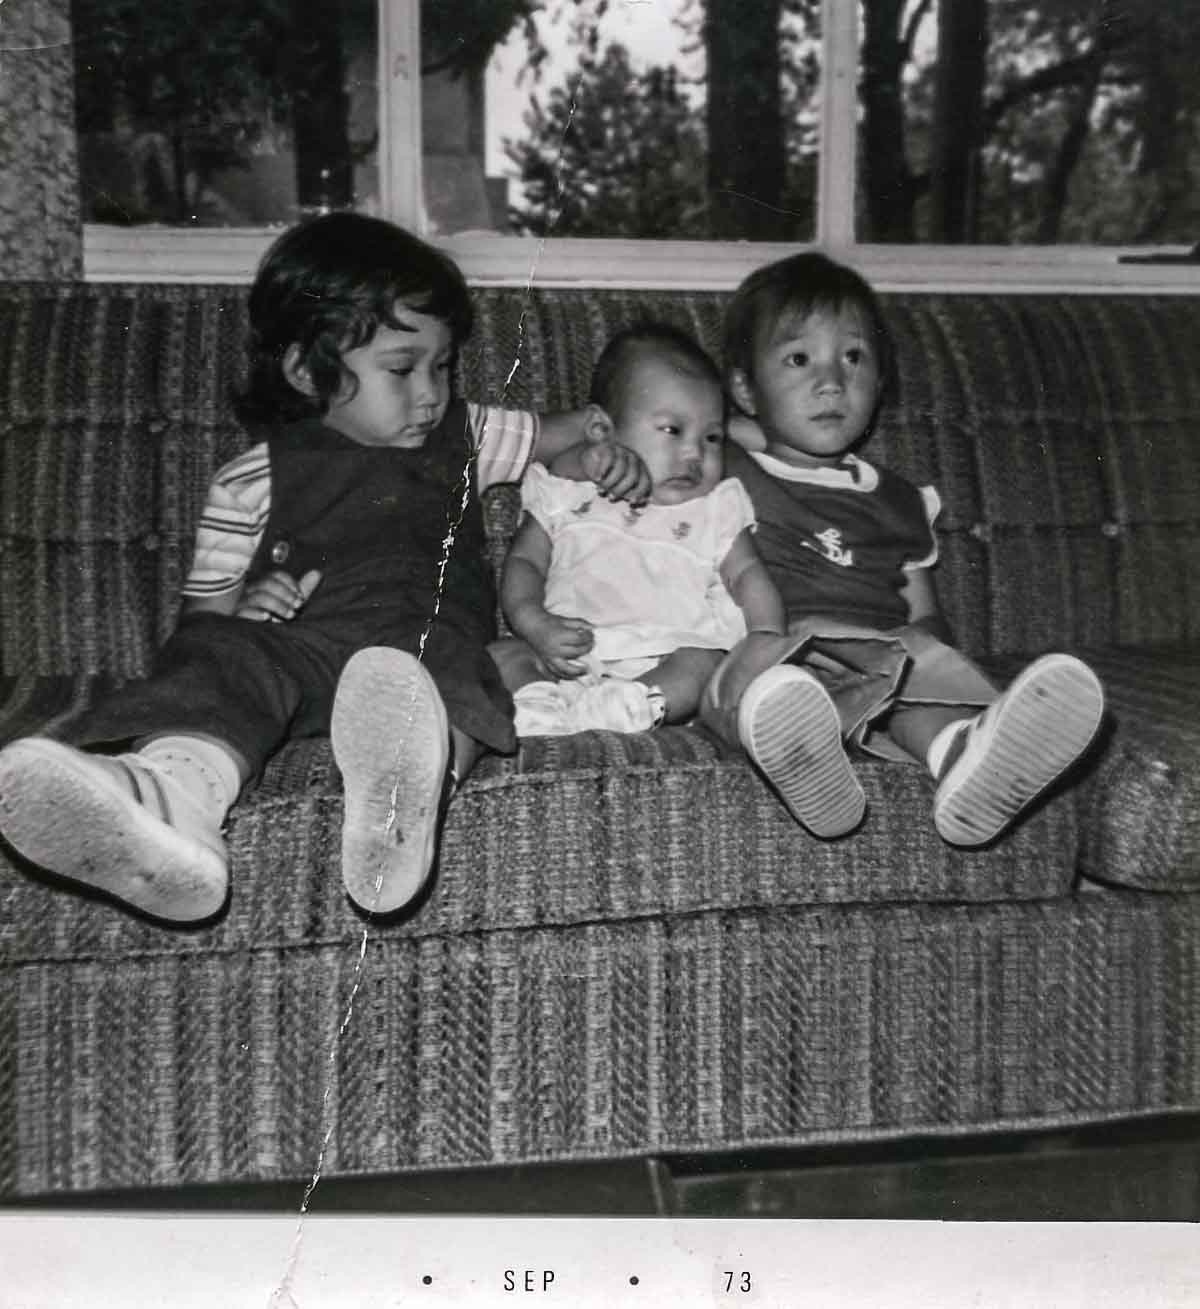 A photo of Kim Sunee as a child on a couch with two other children.